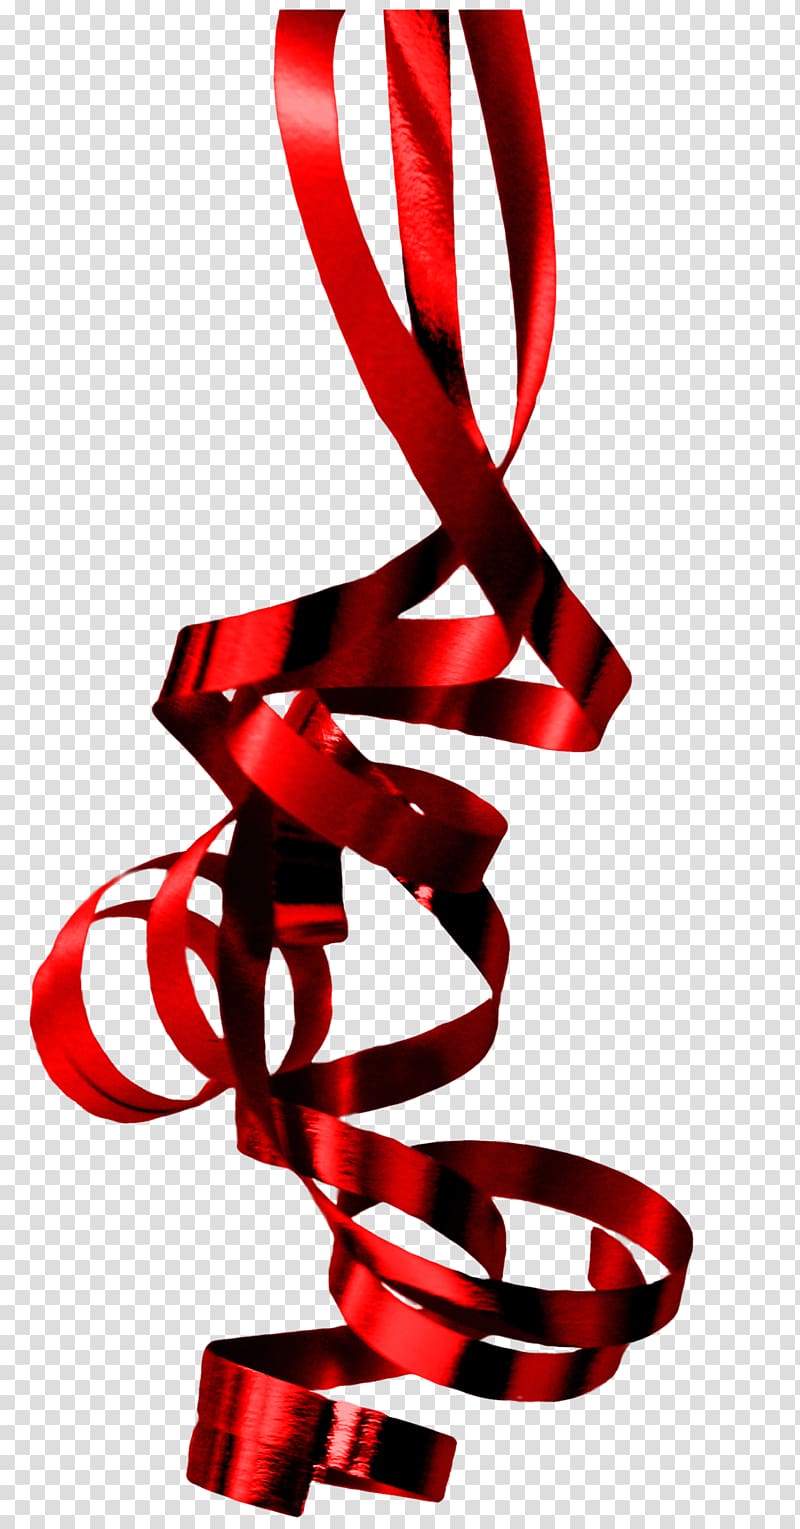 Serpentine streamer, others transparent background PNG clipart